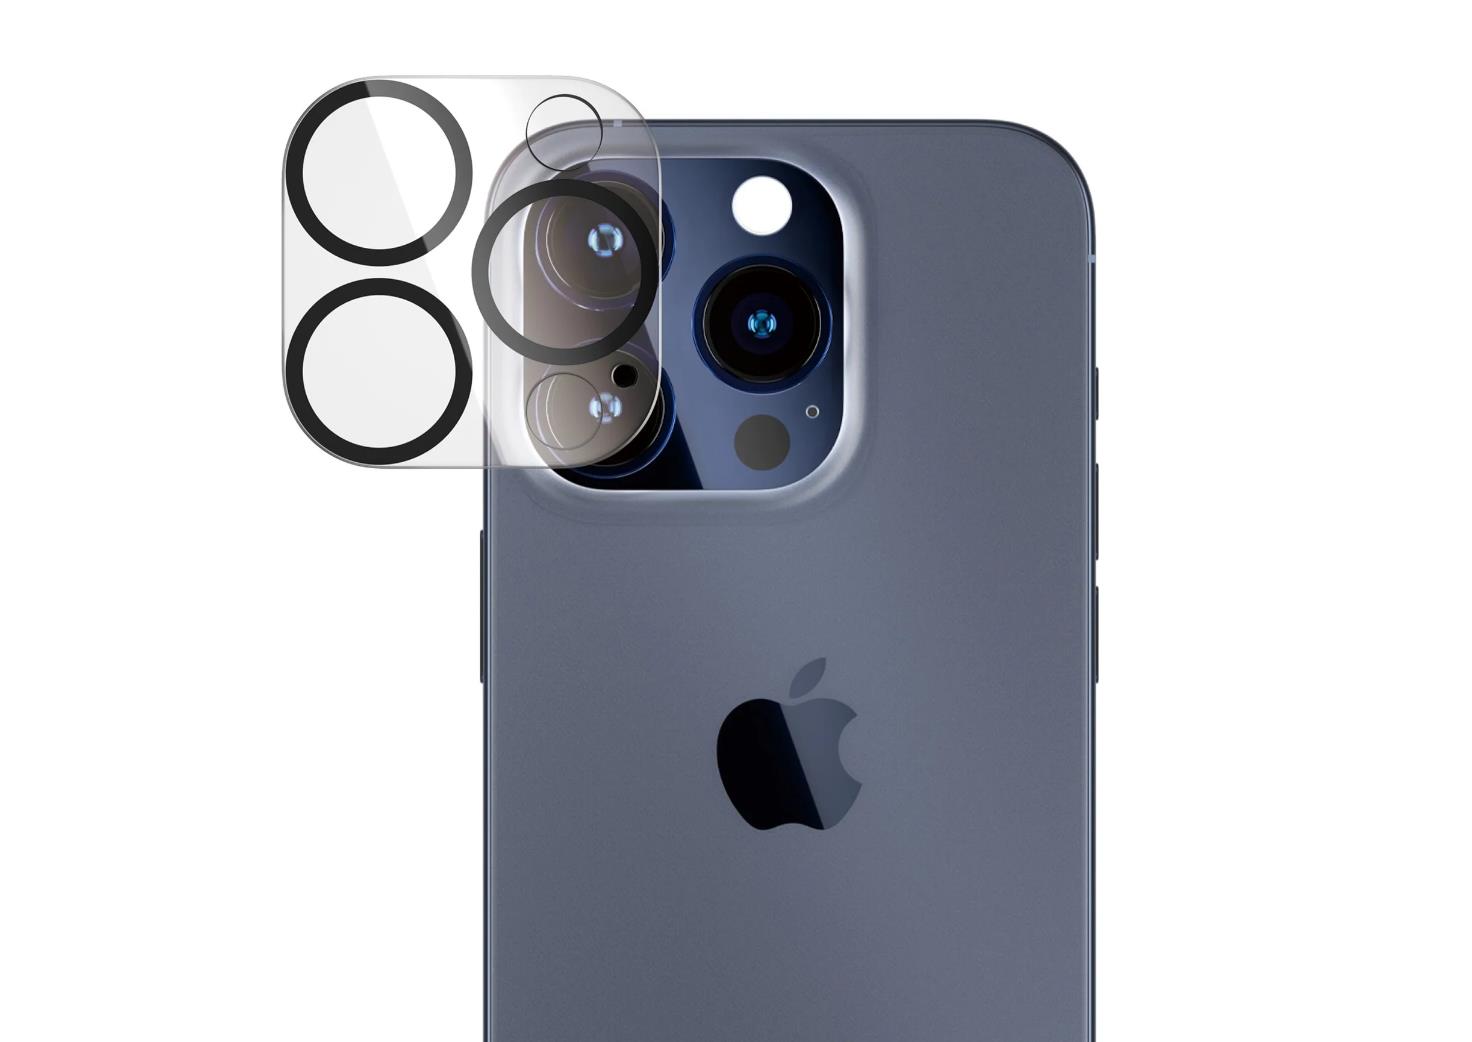 PanzerGlass™ PicturePerfect Camera Lens Protector iPhone 15 Pro | 15 Pro Max